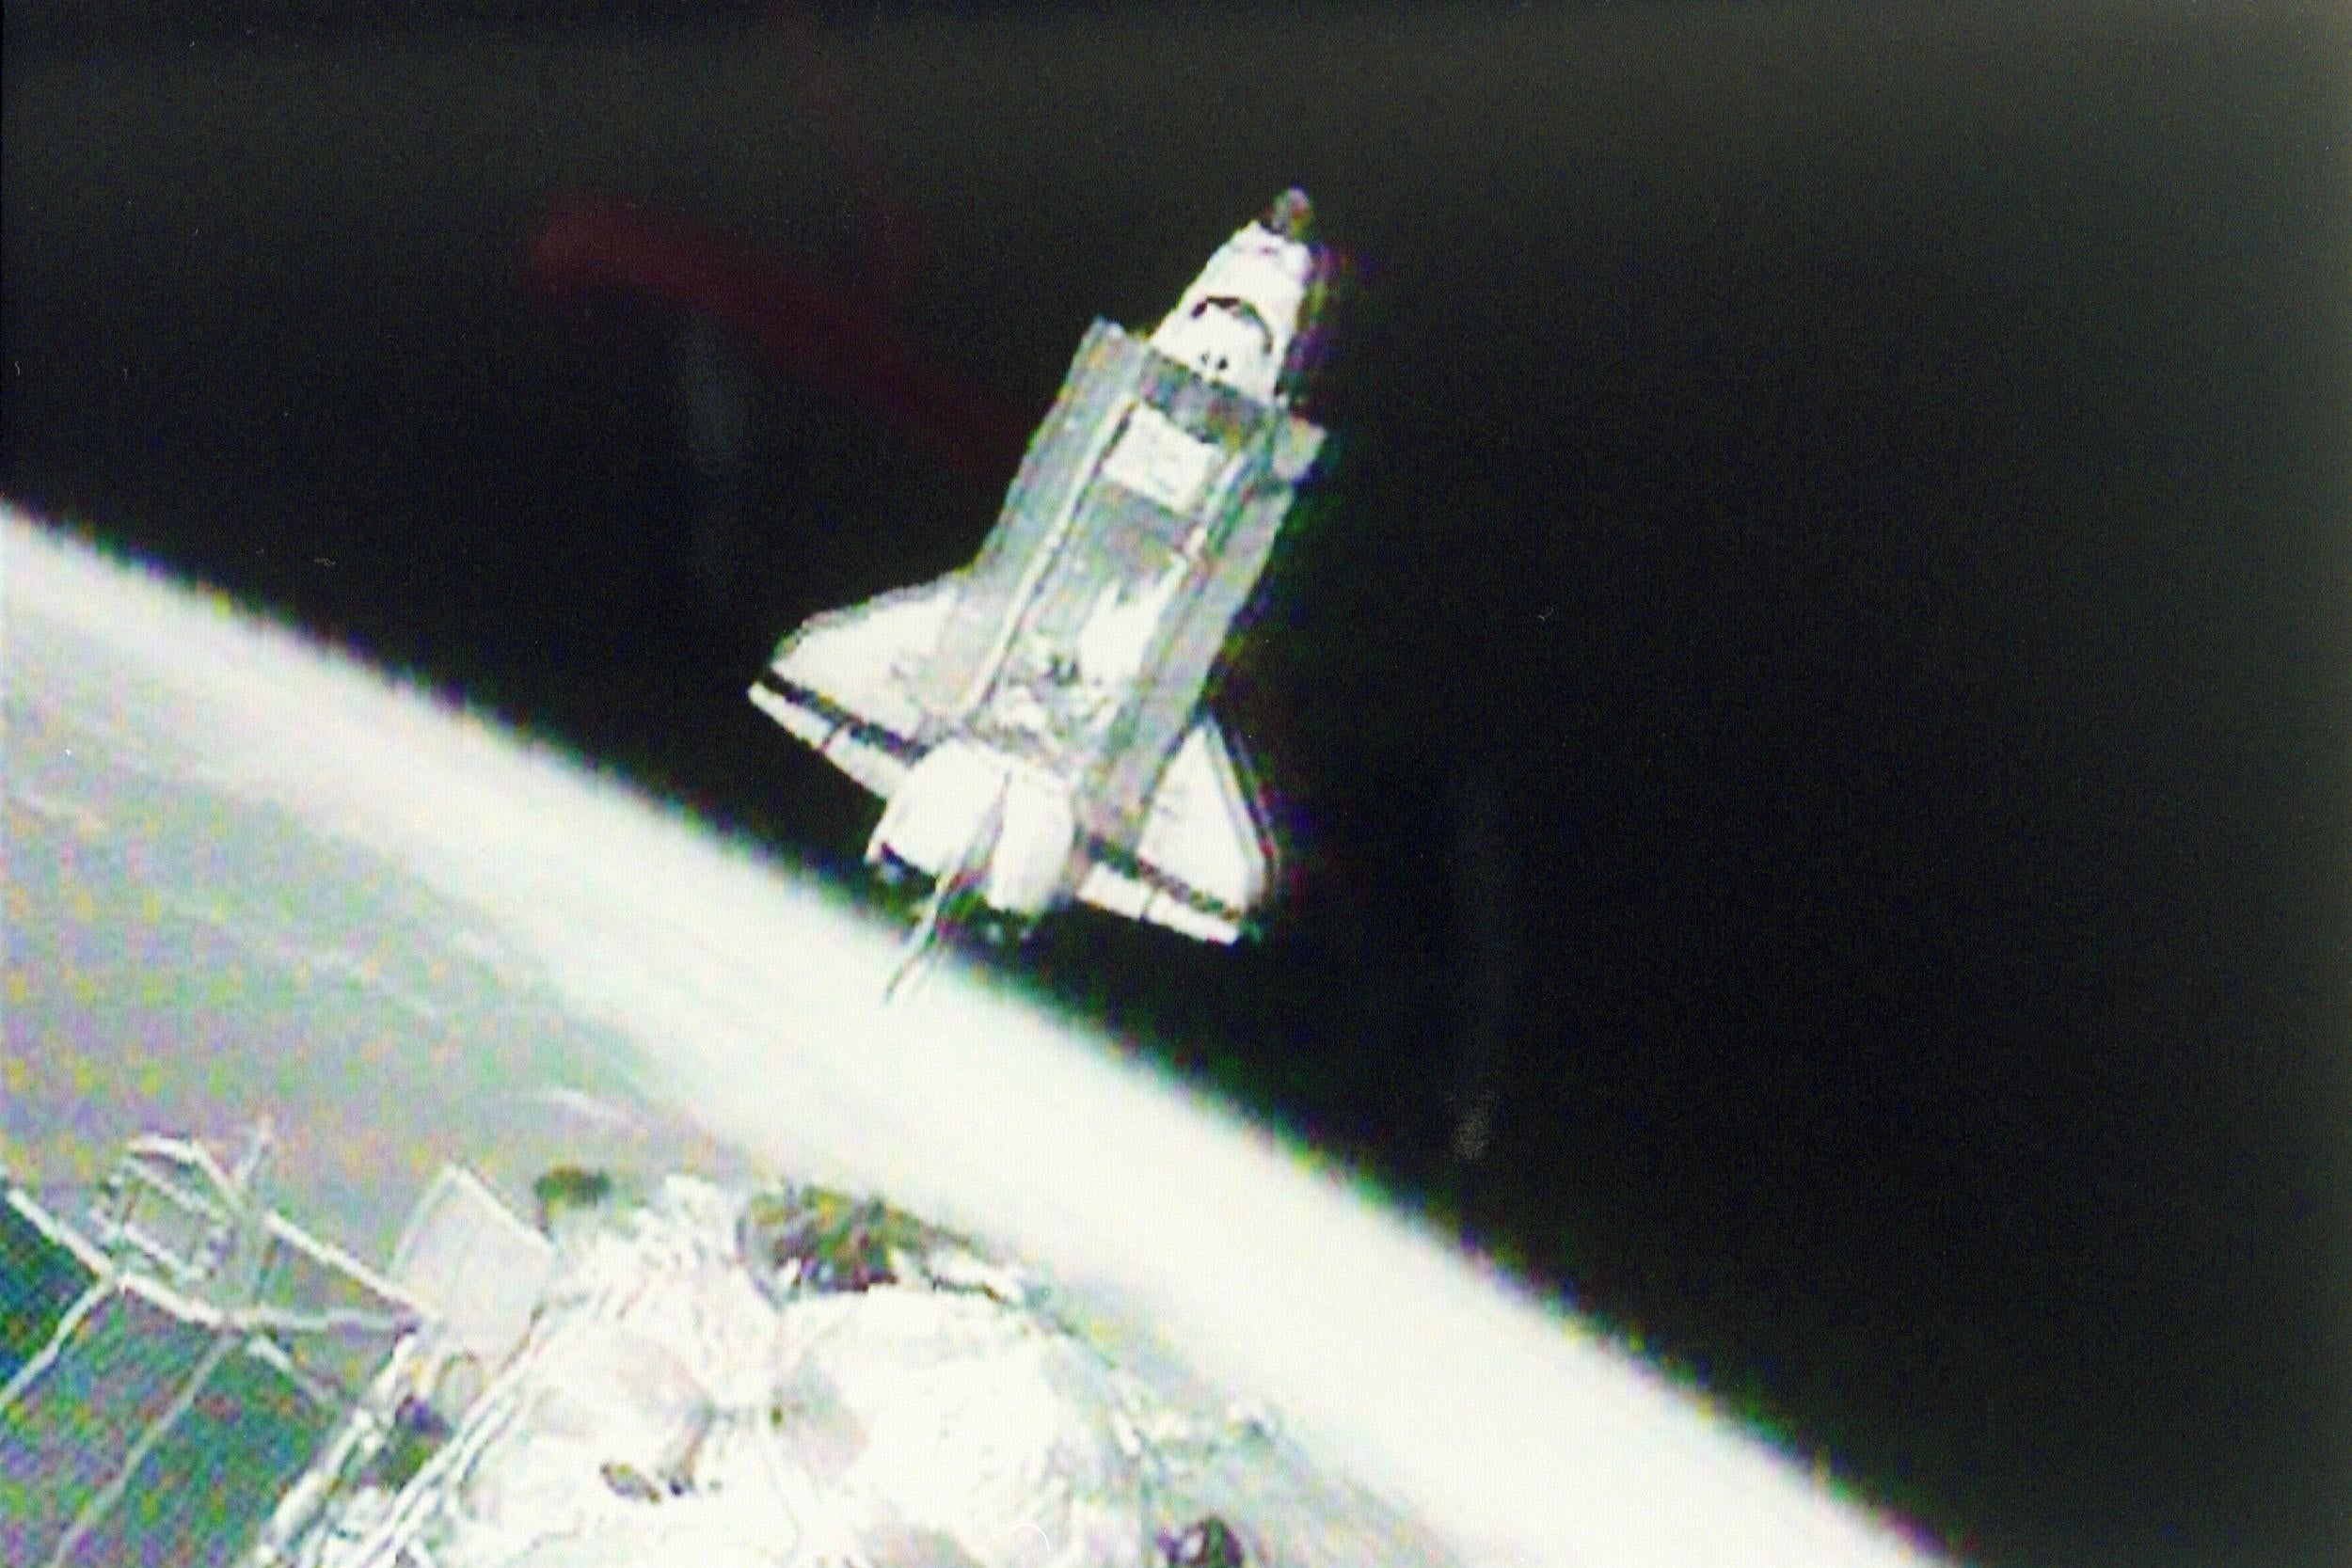 A grainy image of the space shuttle, its bay doors open, and Earth visible below.